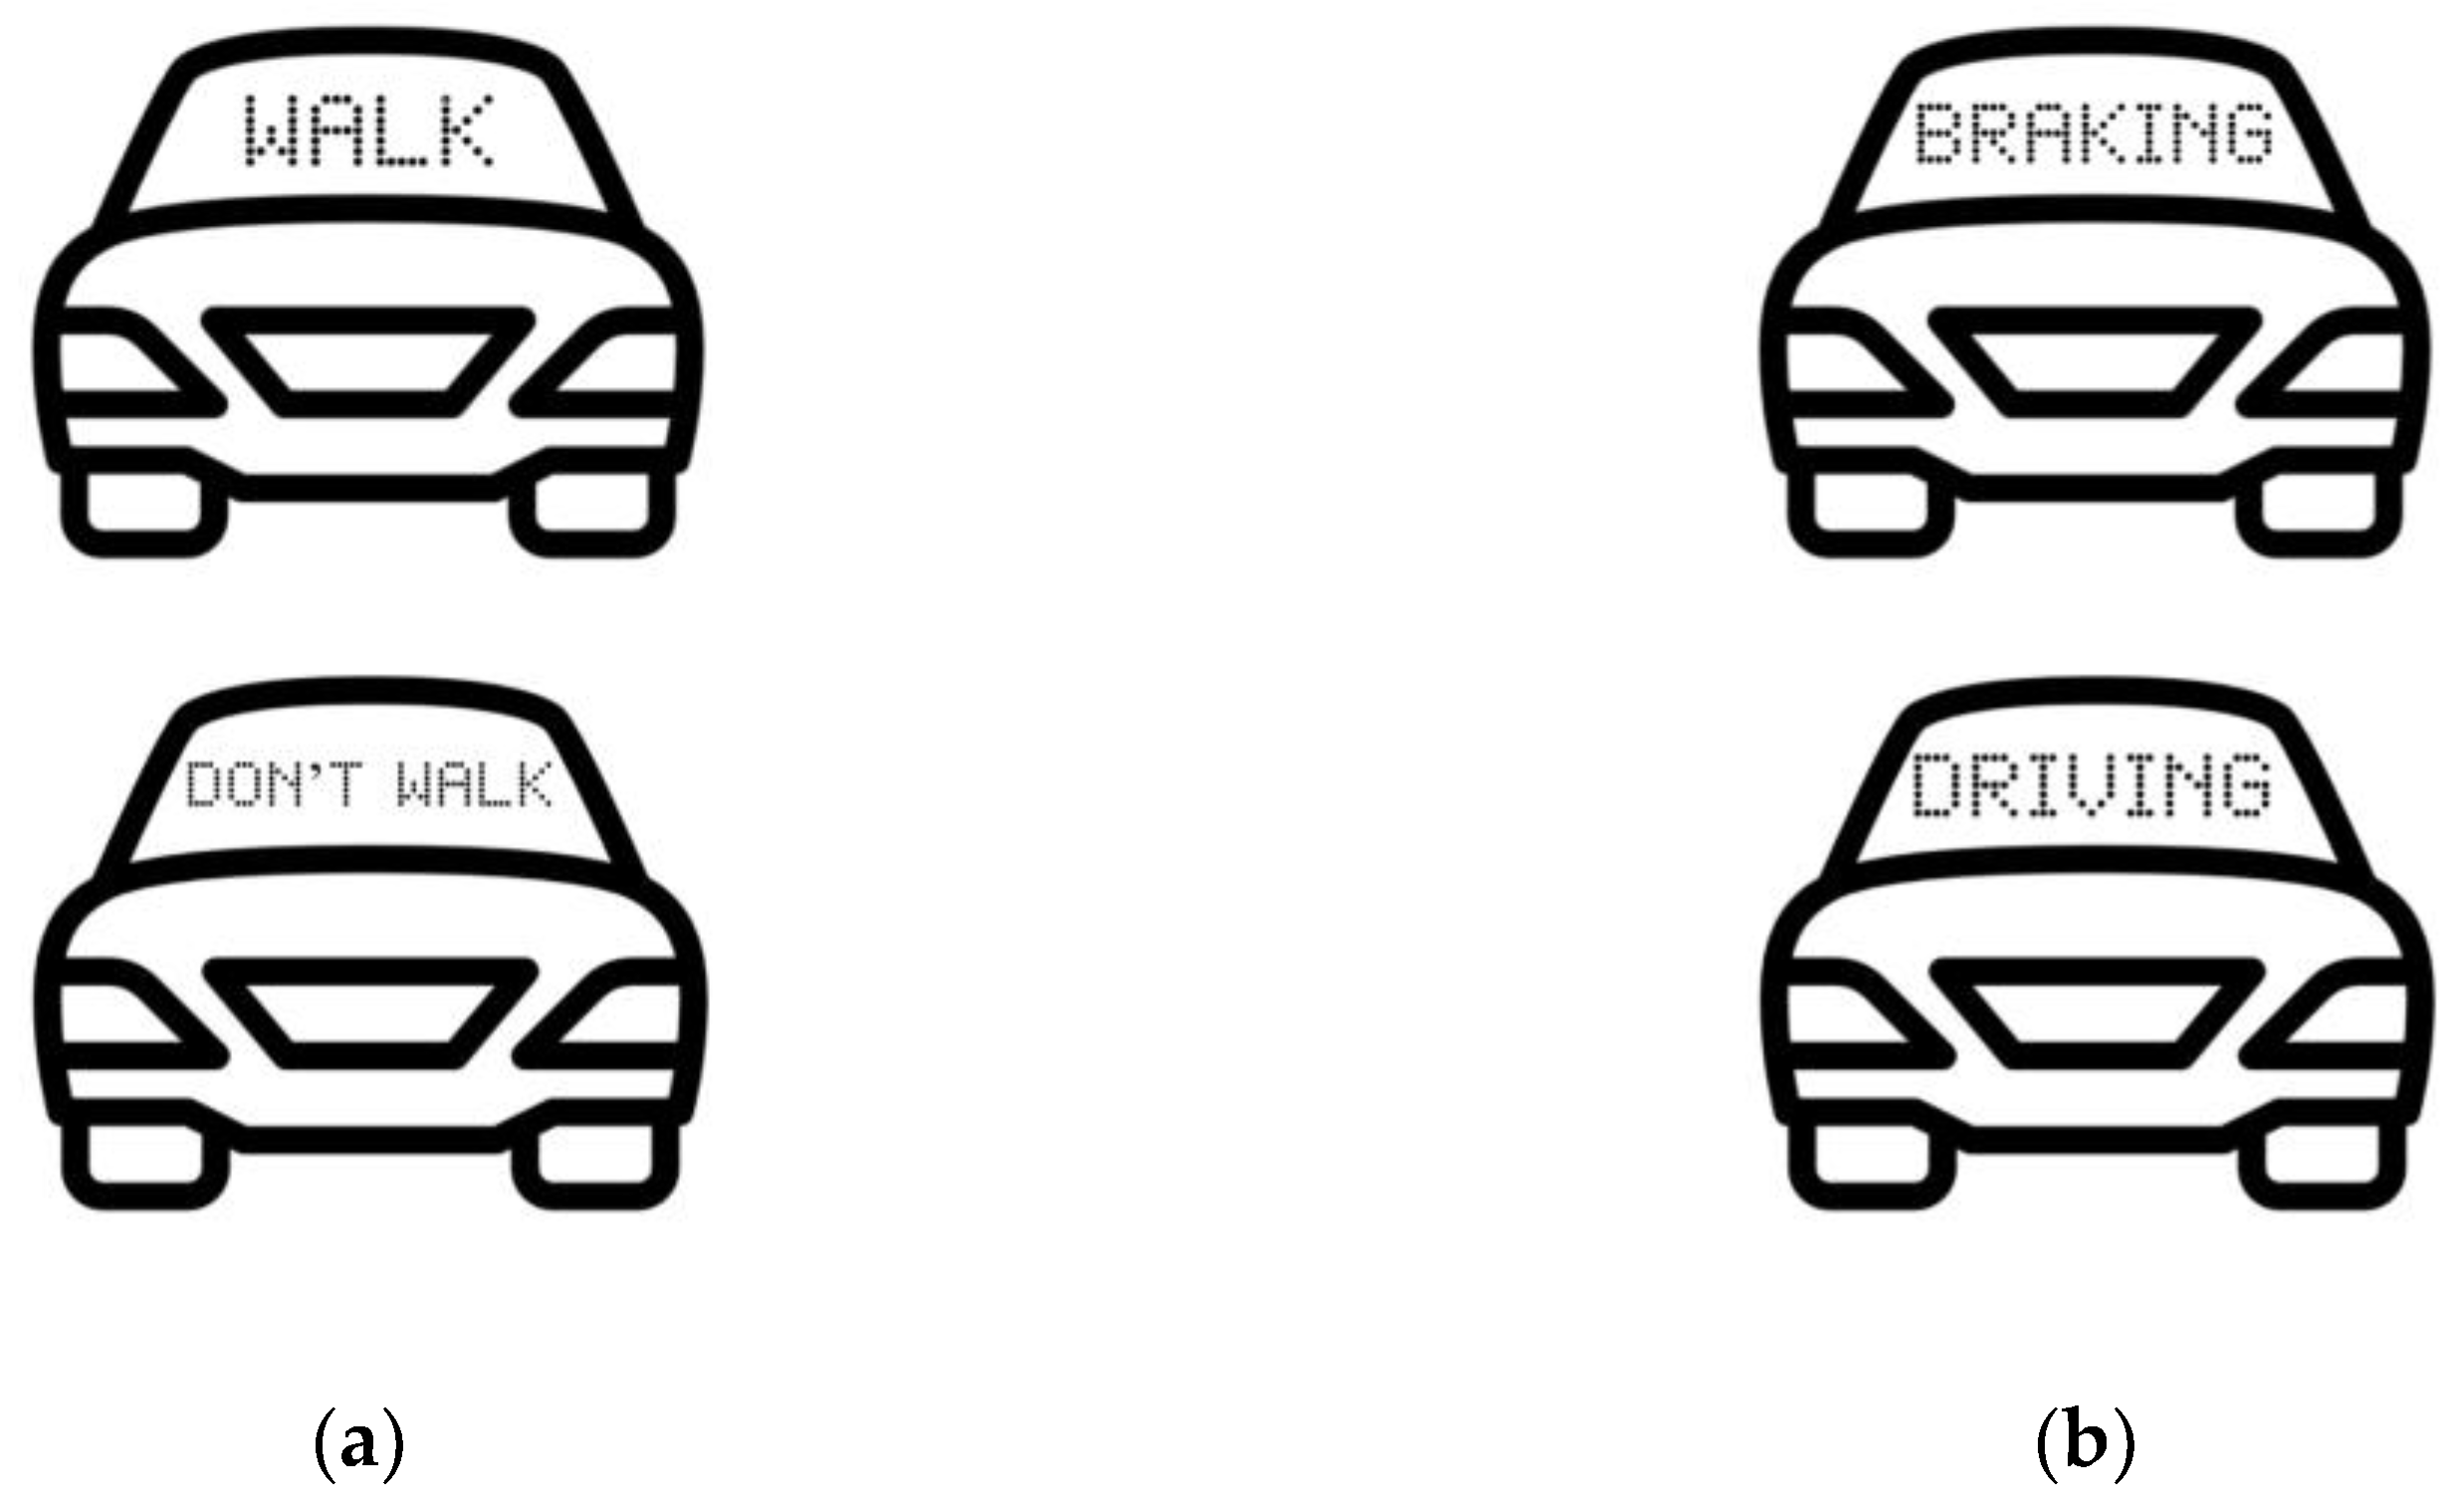 human nose clipart black and white cars